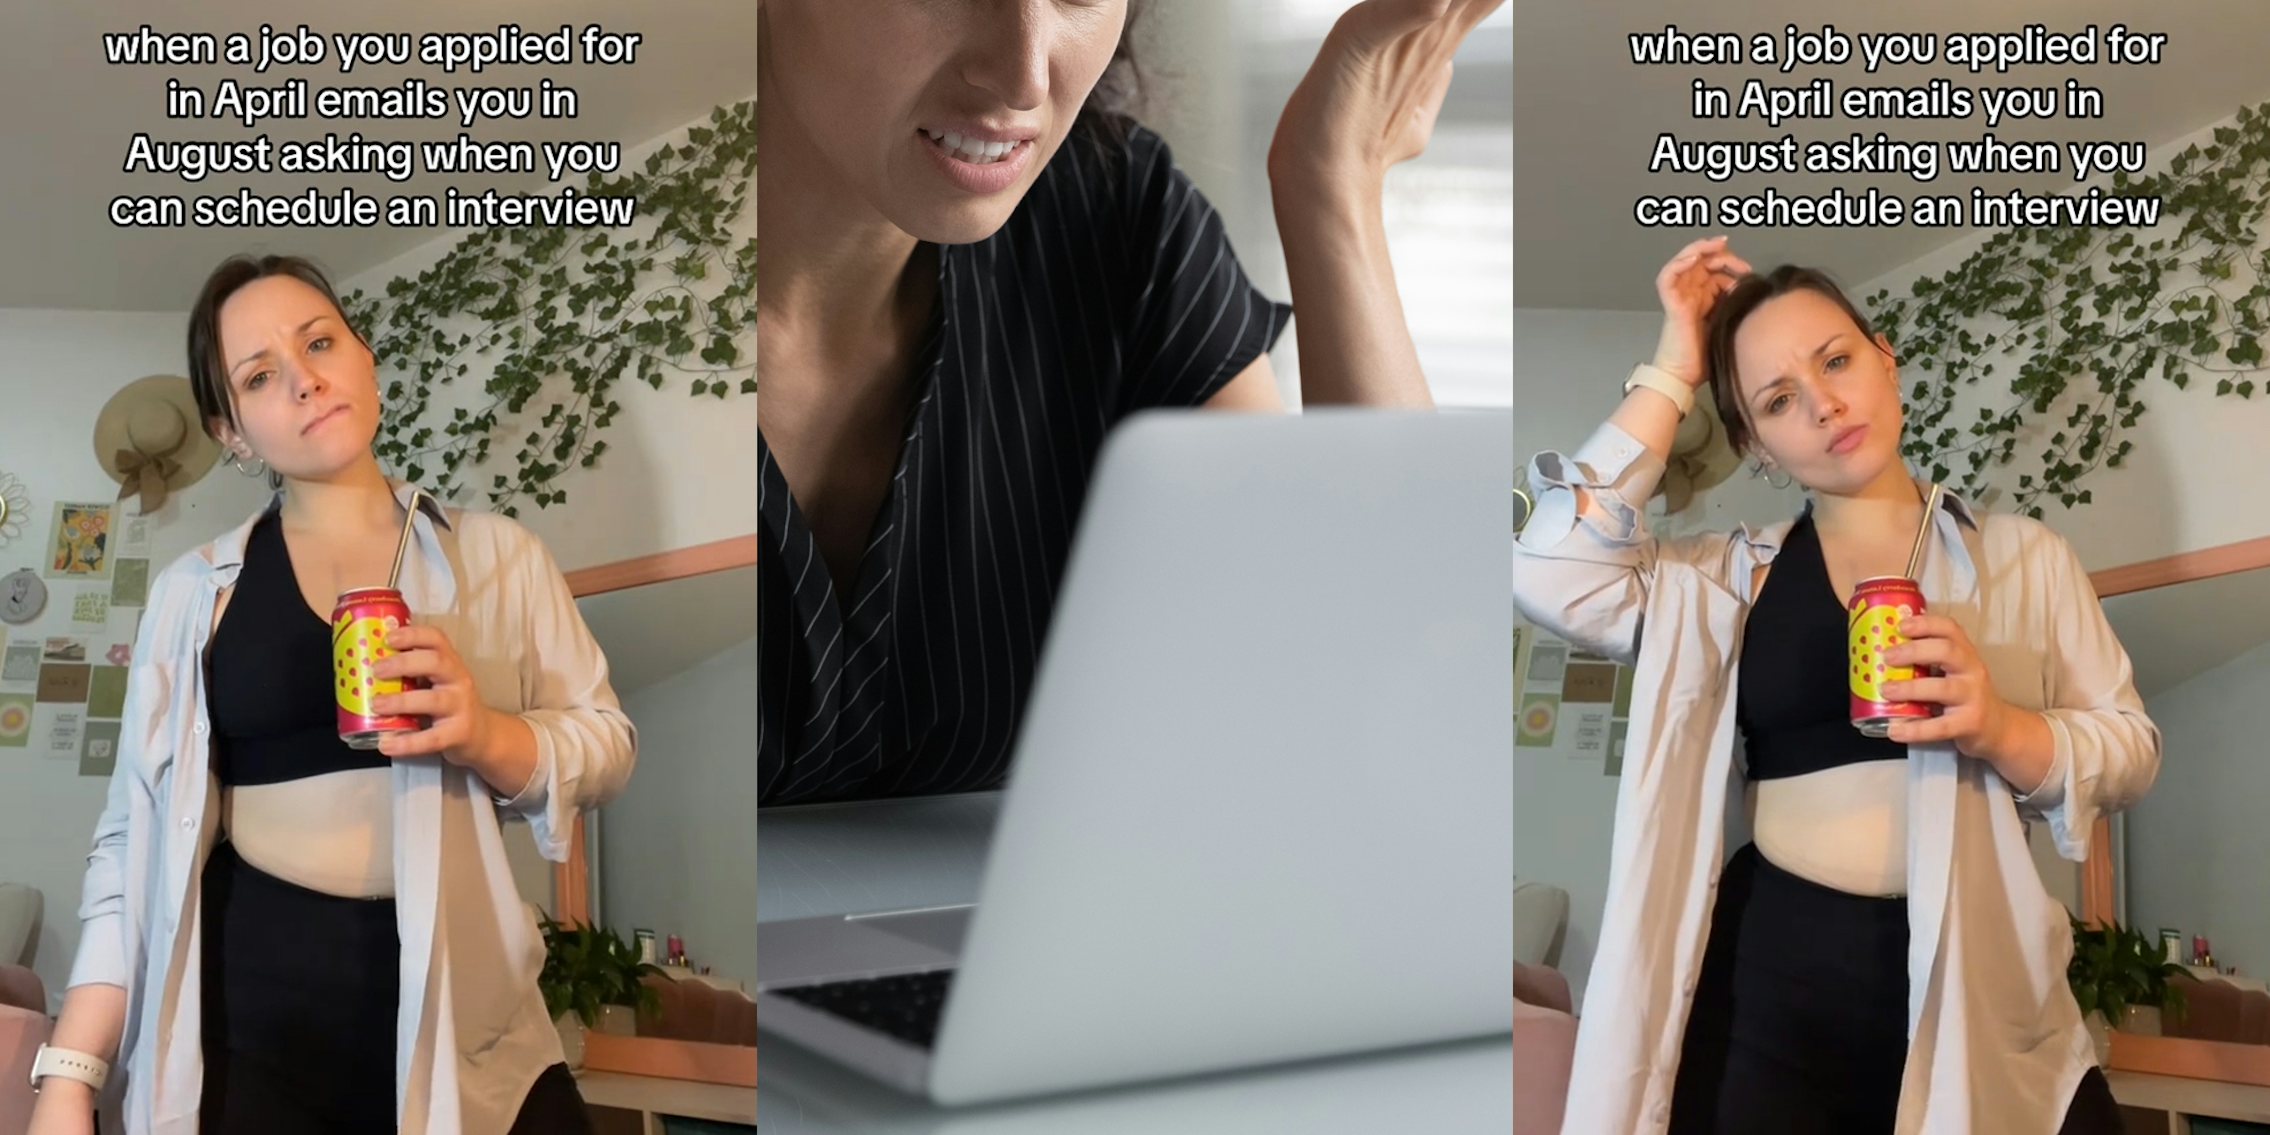 Job hunter with caption 'when a job you applied for in April emails you in August asking when you can schedule an interview' (l) woman confused at laptop (c) Job hunter with caption 'when a job you applied for in April emails you in August asking when you can schedule an interview' (r)